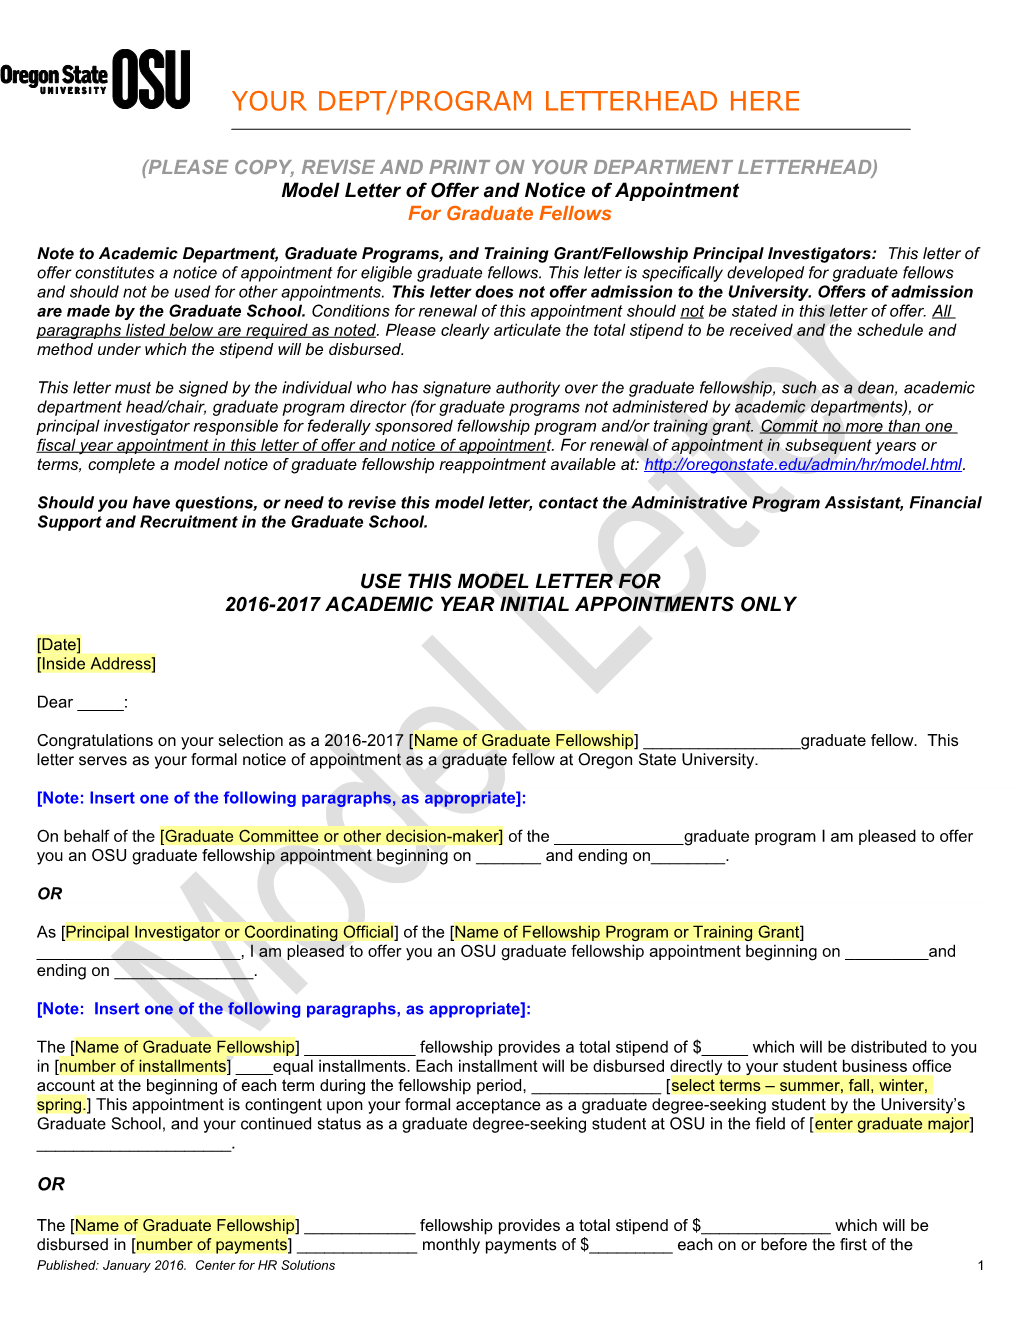 Sample Letter of Offer and Notice of Appointment for Grduate Assistant - Non-Represented